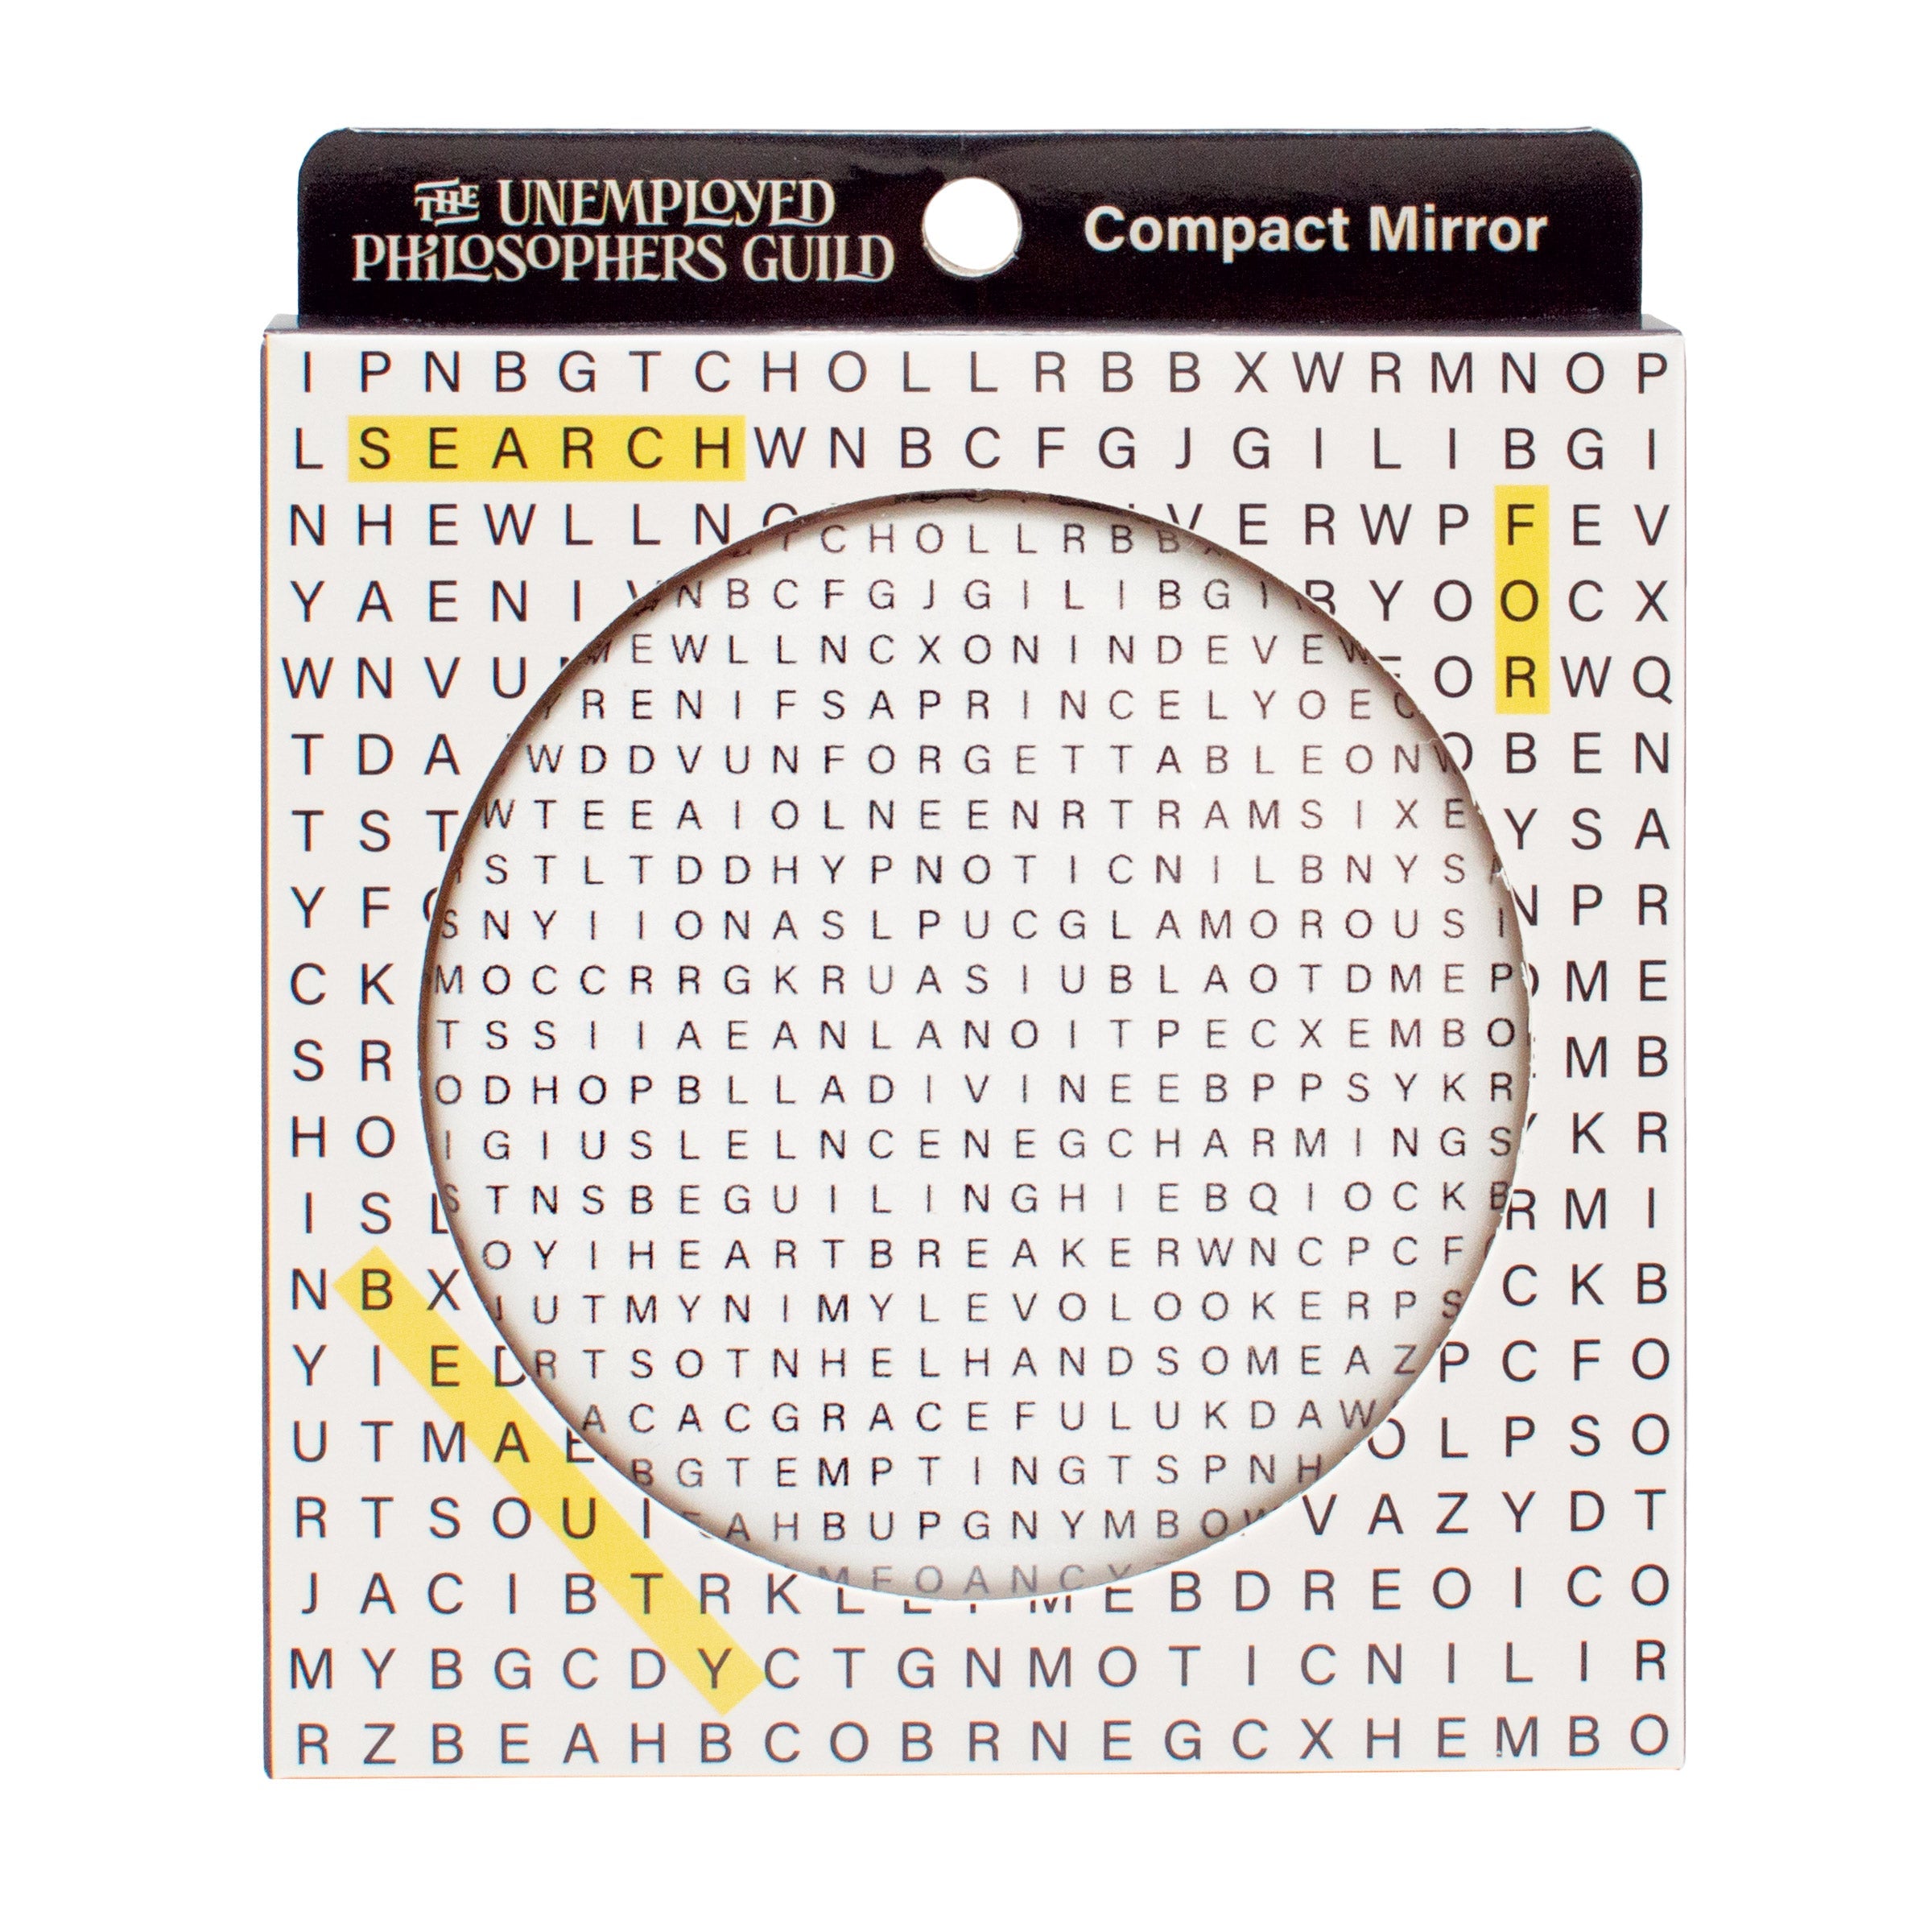 Product photo of Search for Beauty Compact Mirror, a novelty gift manufactured by The Unemployed Philosophers Guild.